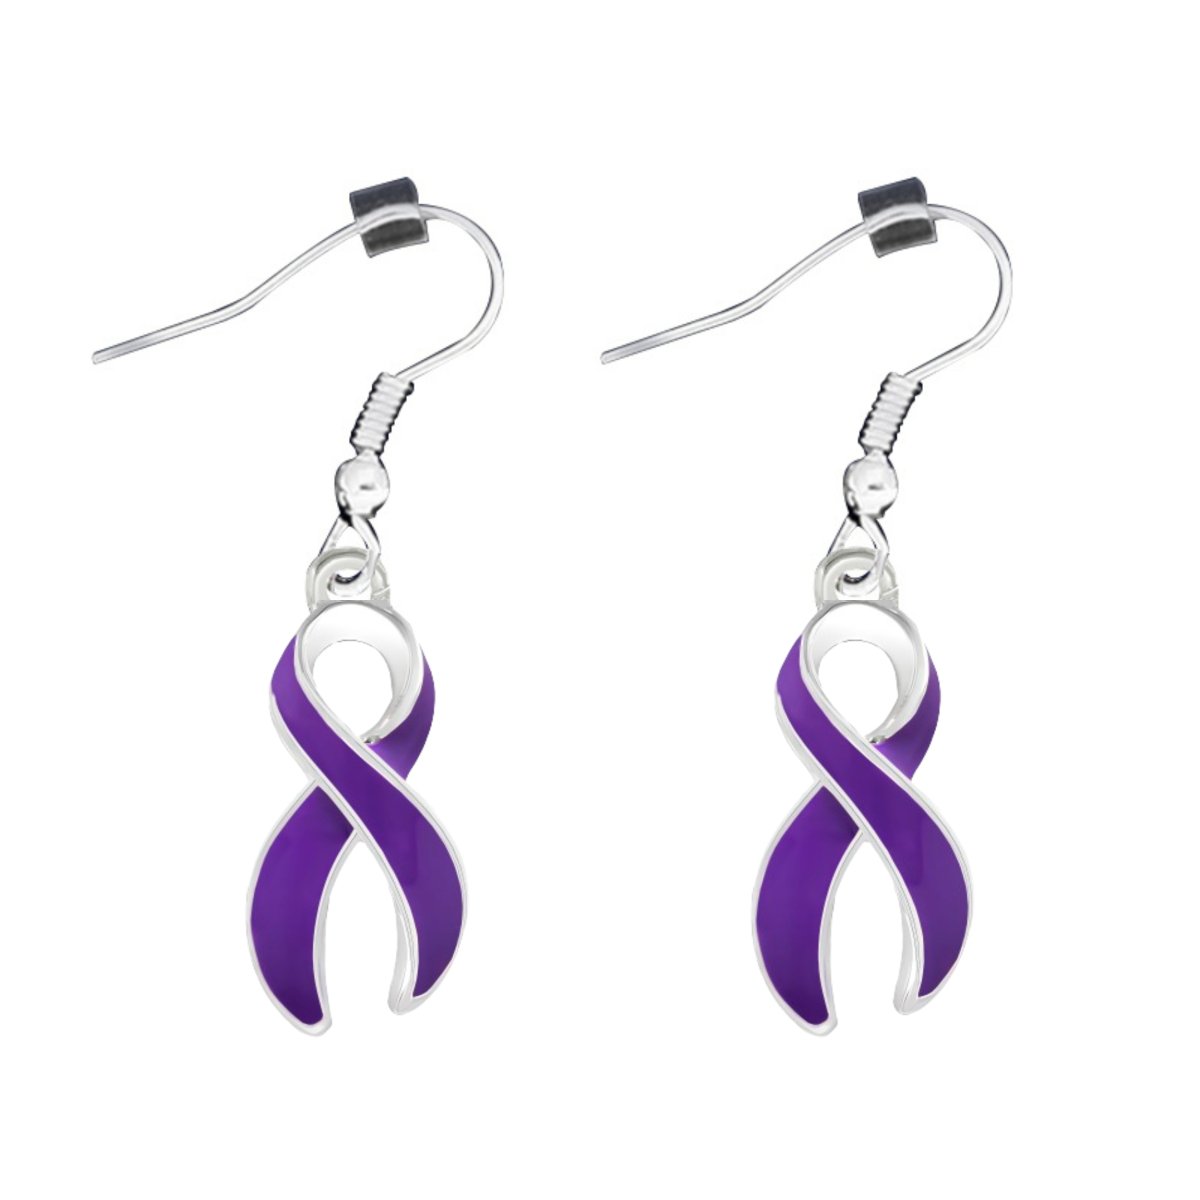 Large Alzheimer's Ribbon Awareness Hanging Earrings - Fundraising For A Cause